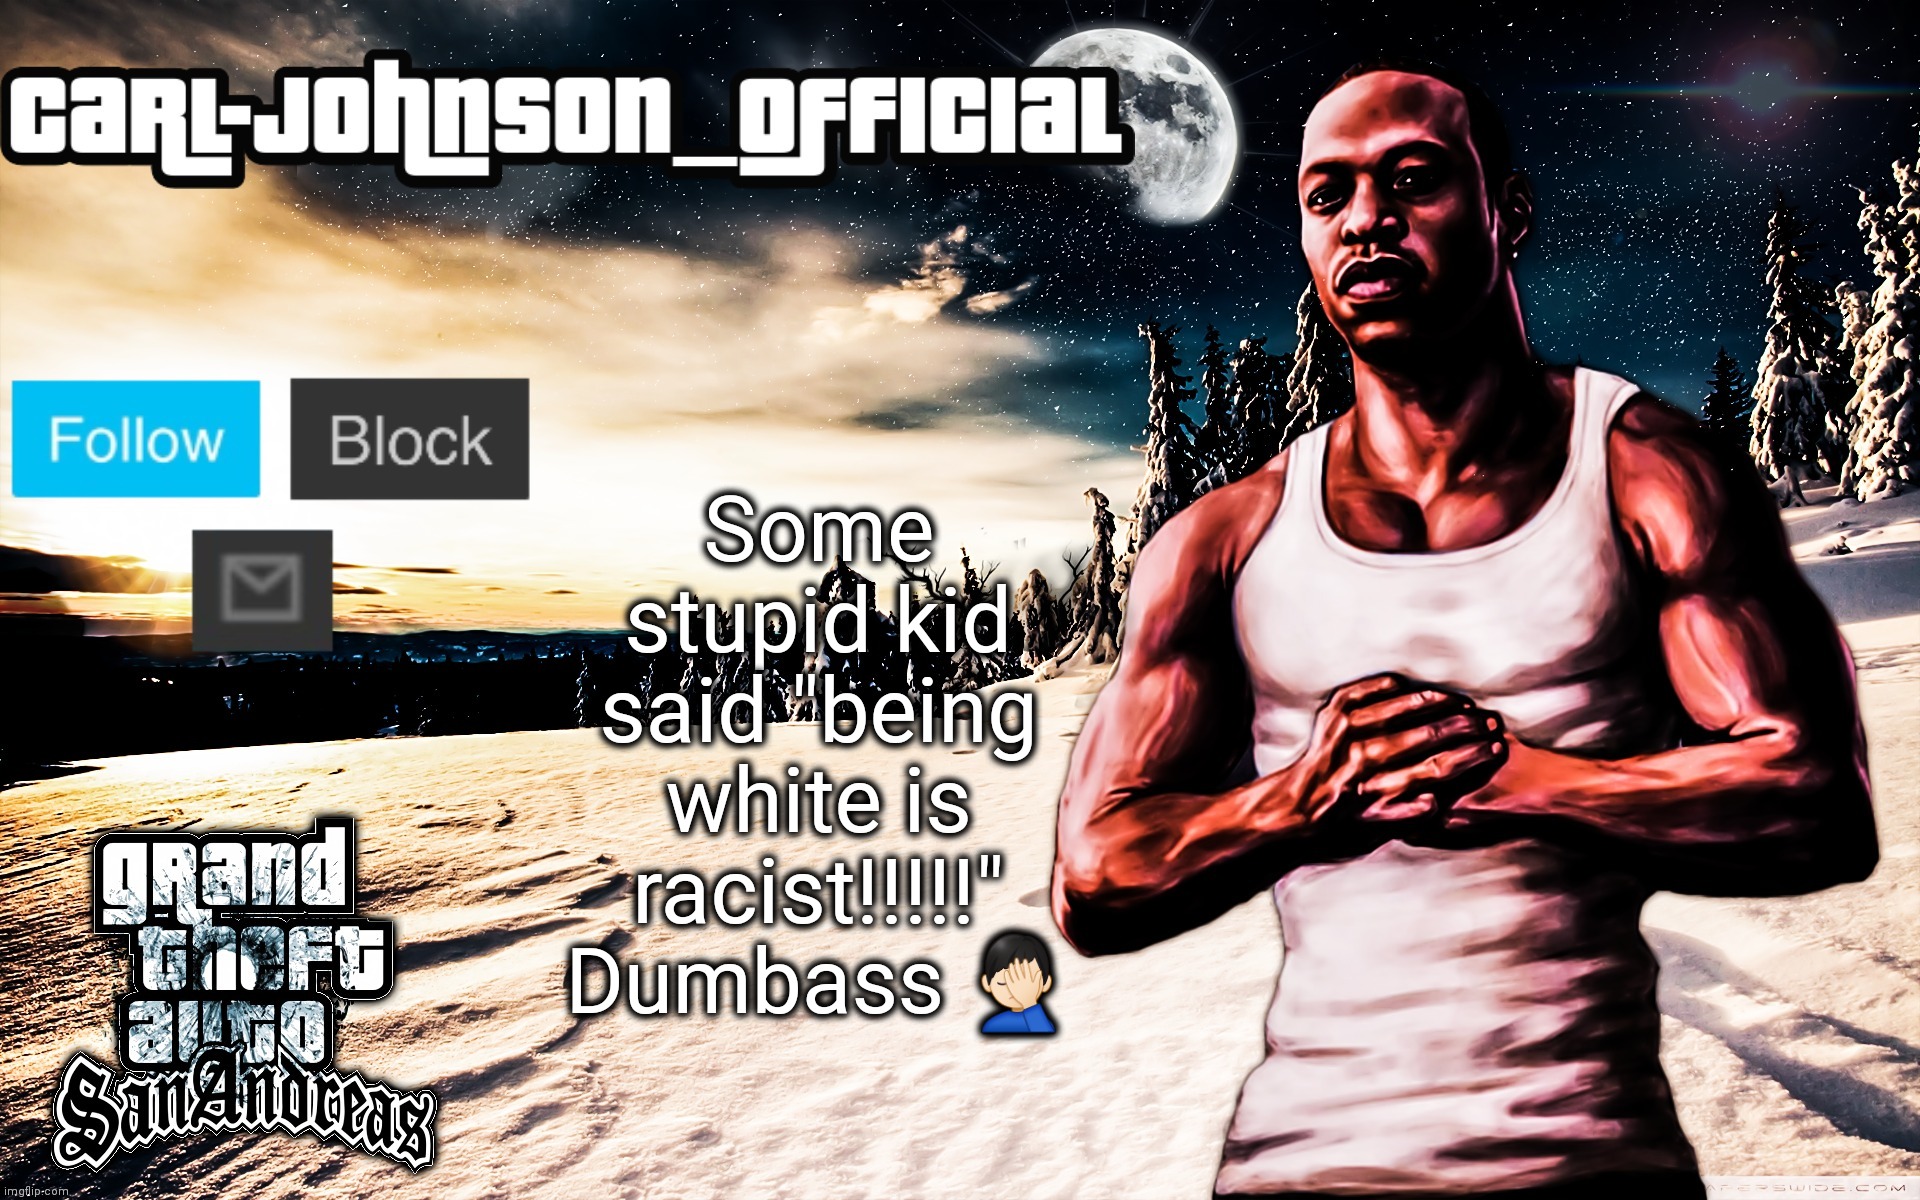 They need a brain | Some stupid kid said "being white is racist!!!!!" Dumbass 🤦🏻‍♂️ | image tagged in carl-johnson_official template | made w/ Imgflip meme maker